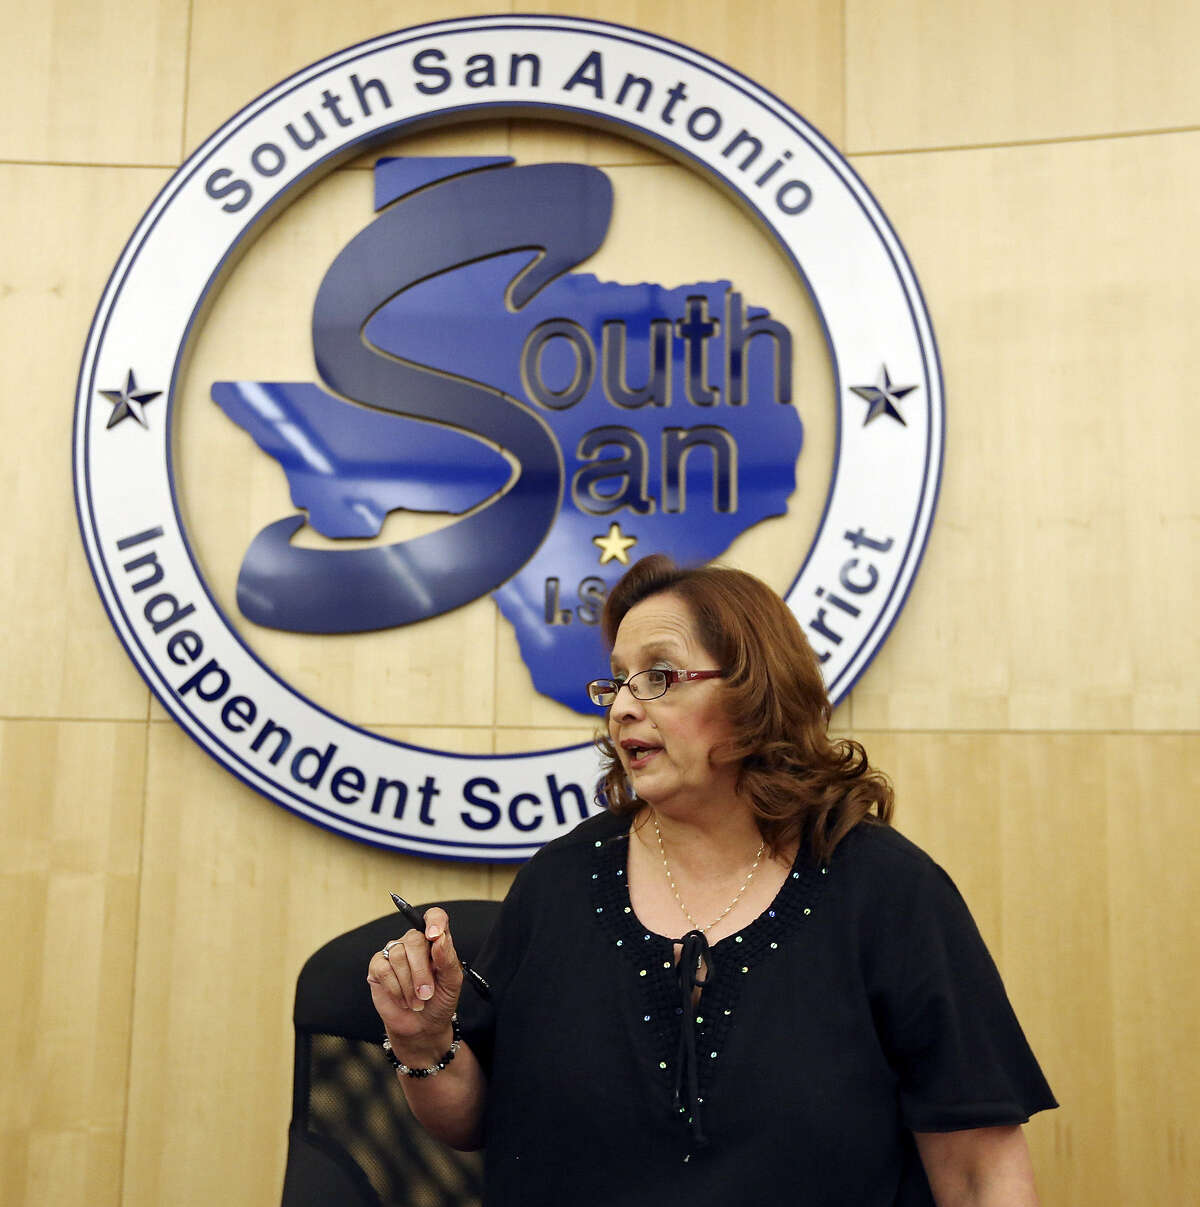 A reader, recounting the actions of South San Antonio Independent School District board President Rose Marie Martinez and others, cites 40 years of problems.